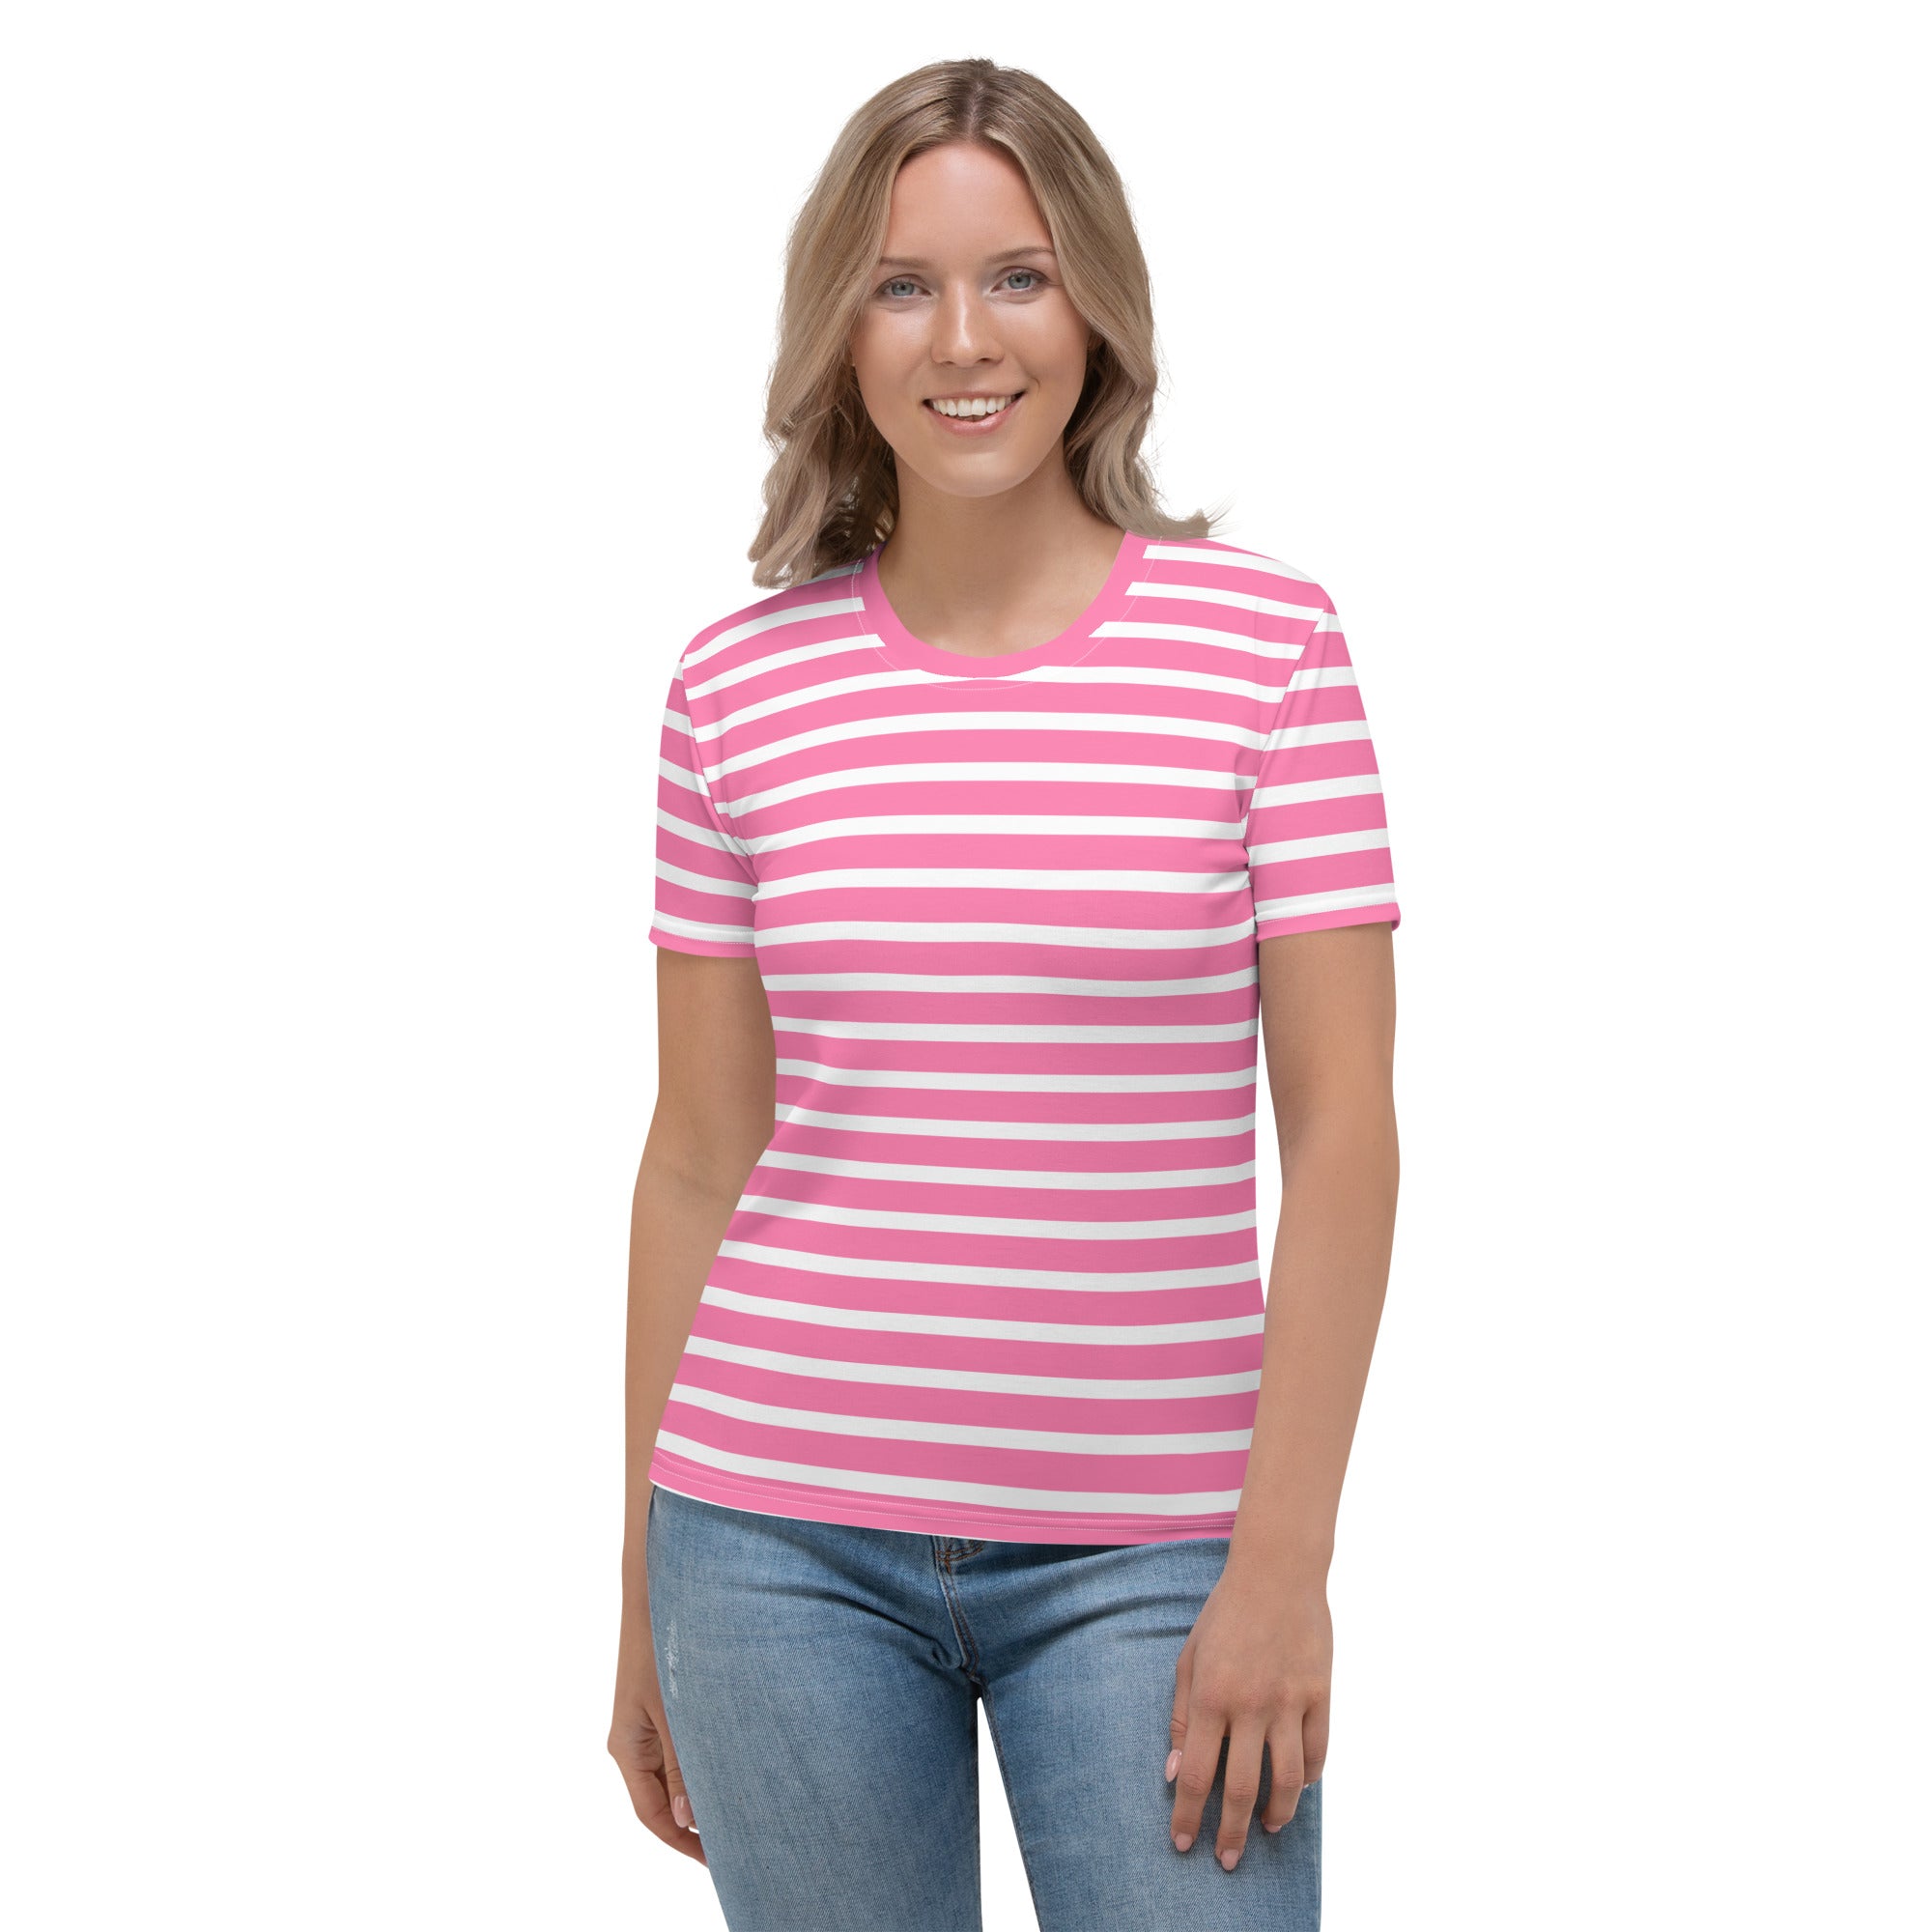 Women's T-shirt- White and Pink Striped